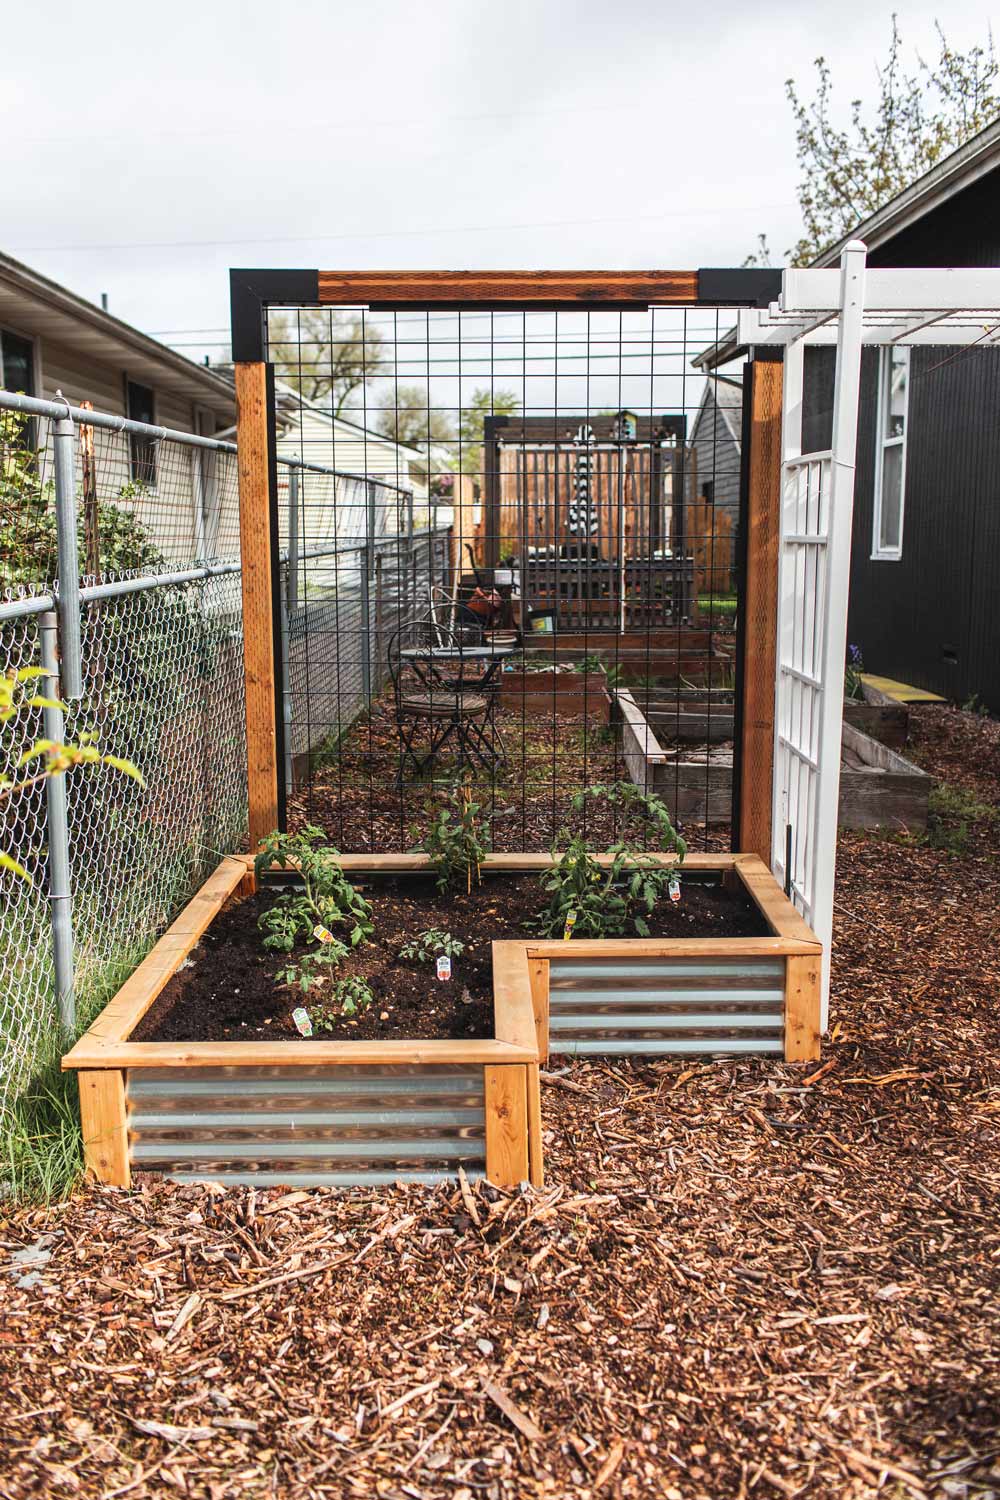 A rasied garden bed with plants, a trellis, and mulched ground.